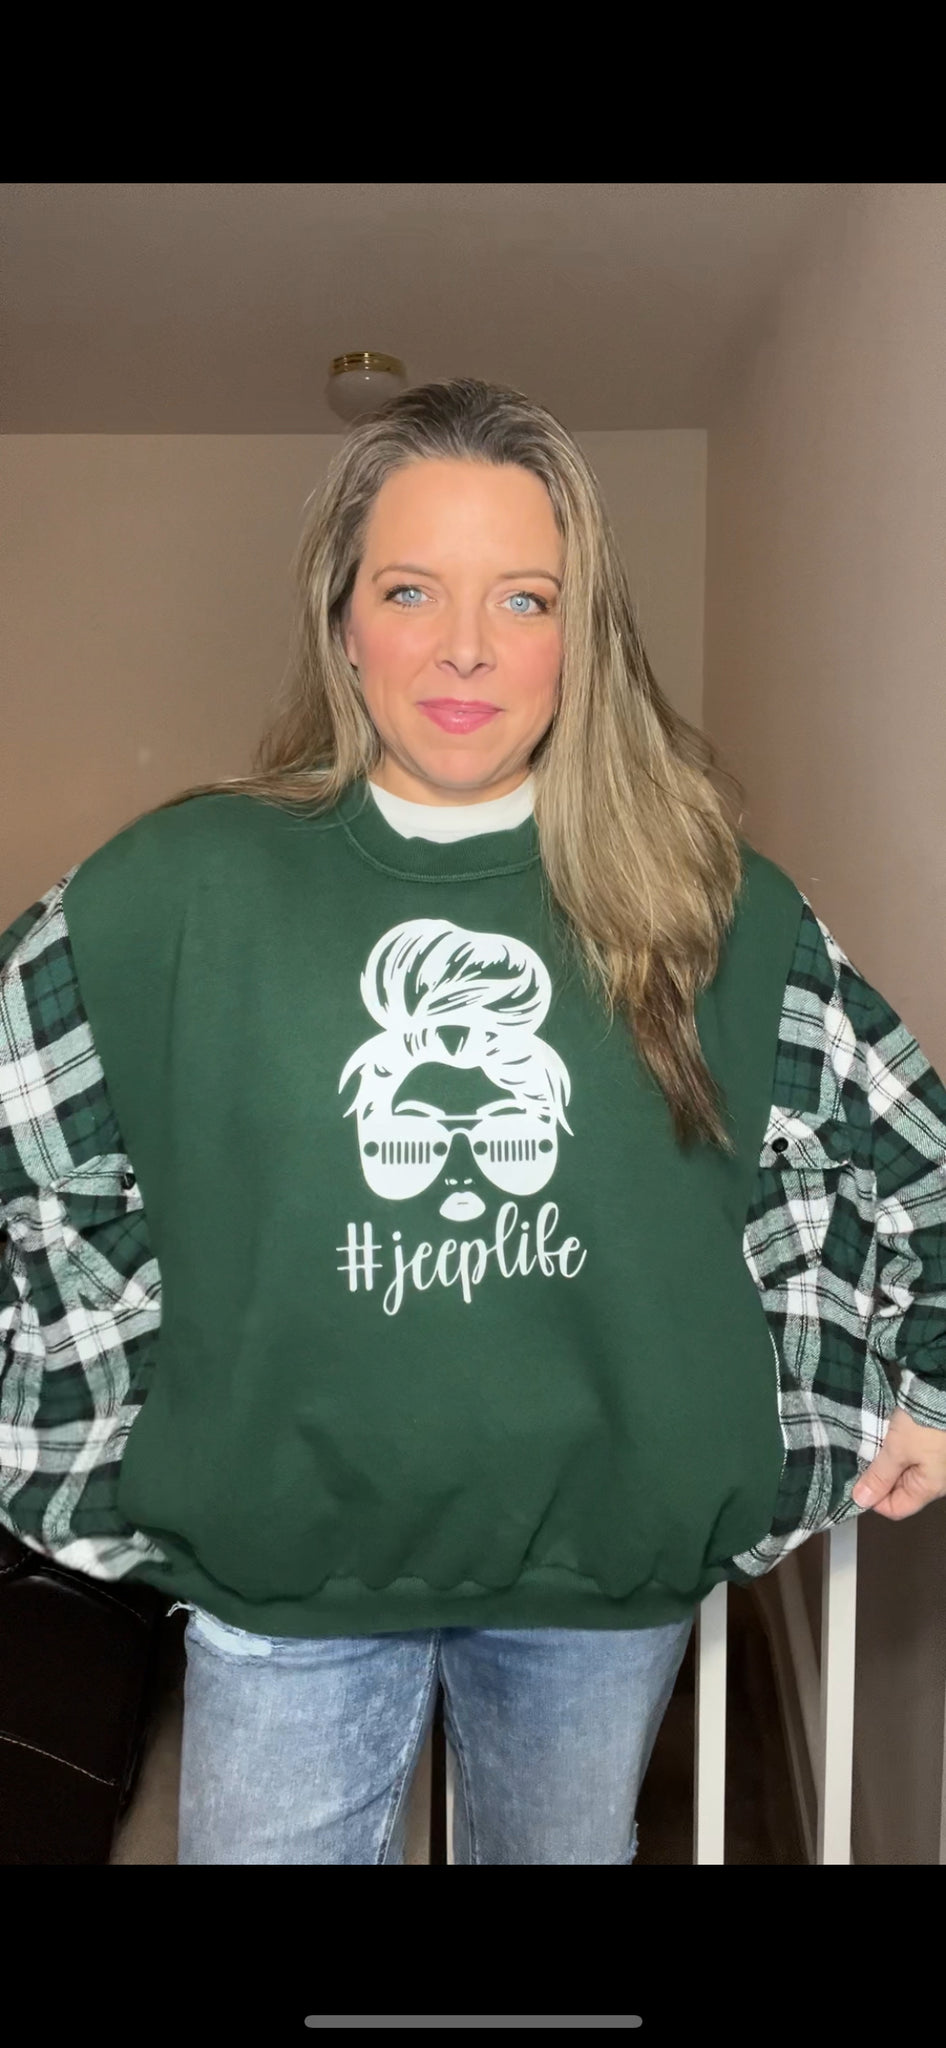 Jeep Life – women’s 1X – midweight sweatshirt with flannel sleeves ￼